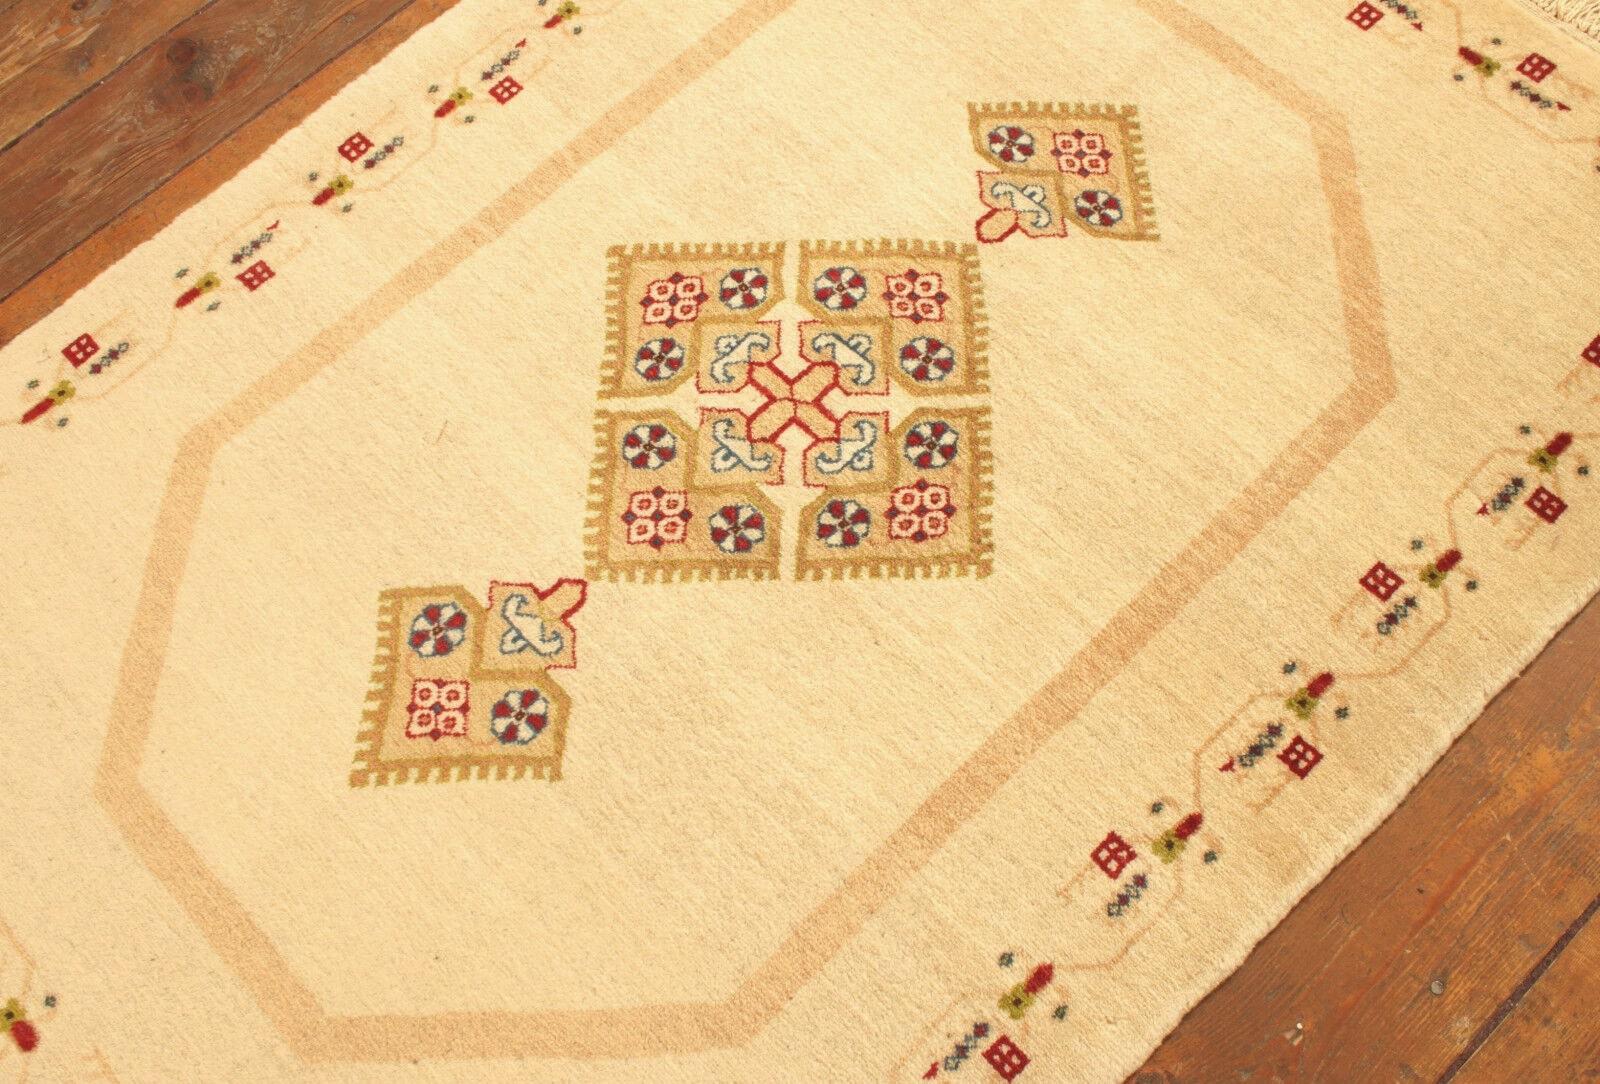 Here’s a product description for the Handmade Vintage Persian Style Yalameh Rug:

Handmade Vintage Persian Style Yalameh Rug (3.4’ x 4.9’)

Step into the rich tapestry of Persian heritage with our Handmade Vintage Persian Style Yalameh Rug. Crafted